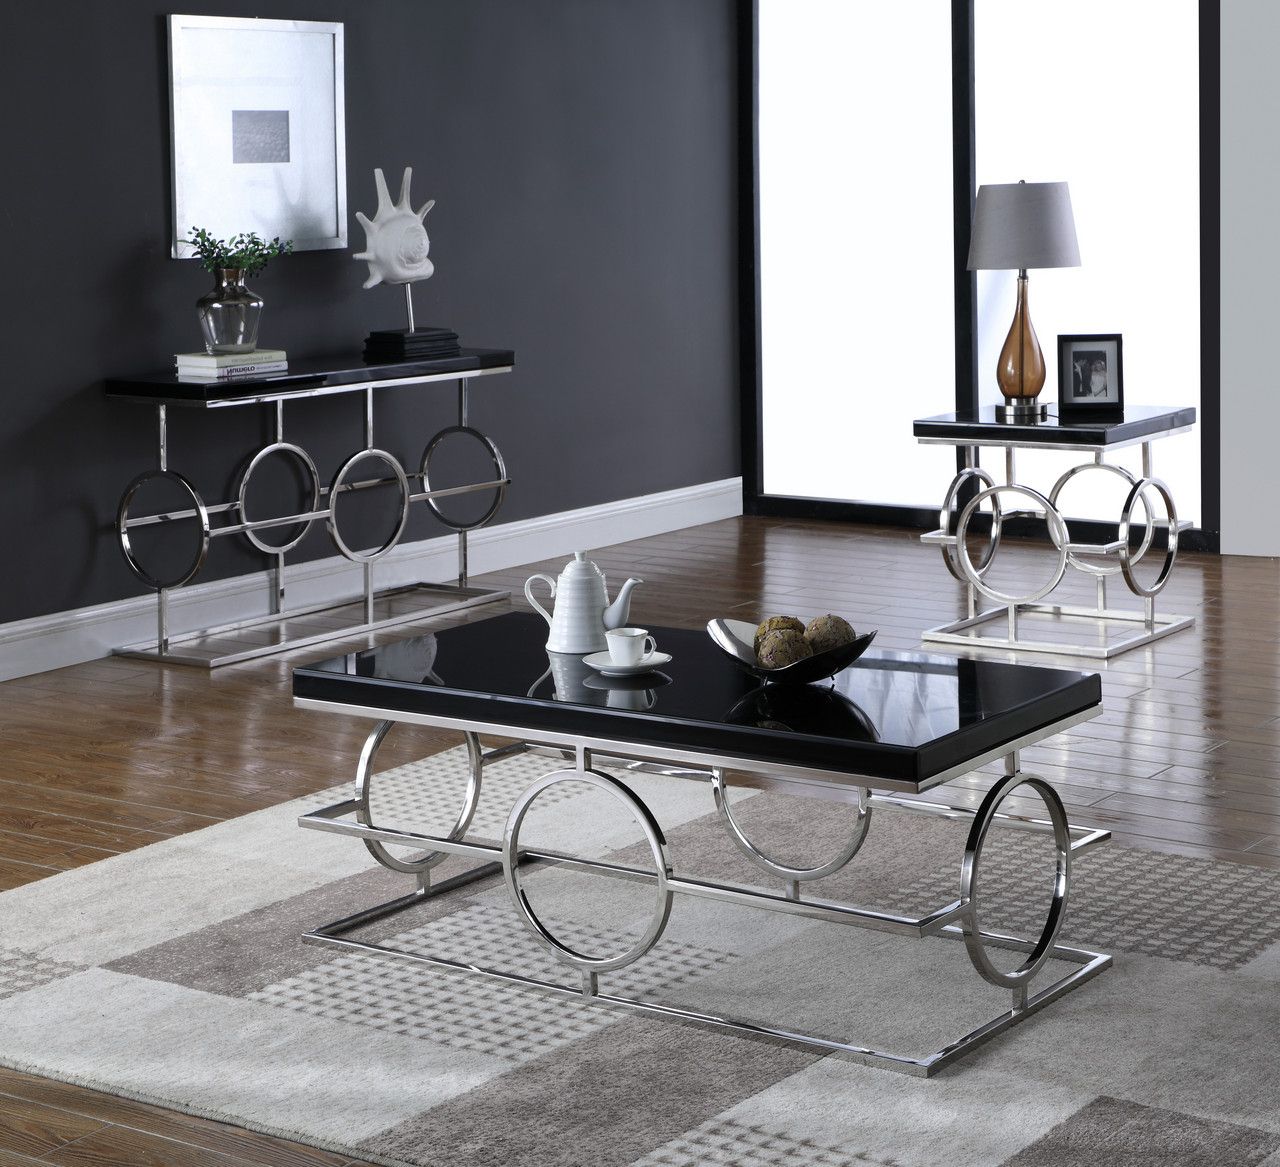 Silver Stainless Steel Coffee Tables Within Latest Cesario Modern Black Glass Top Coffee Table W/shaped (View 5 of 20)